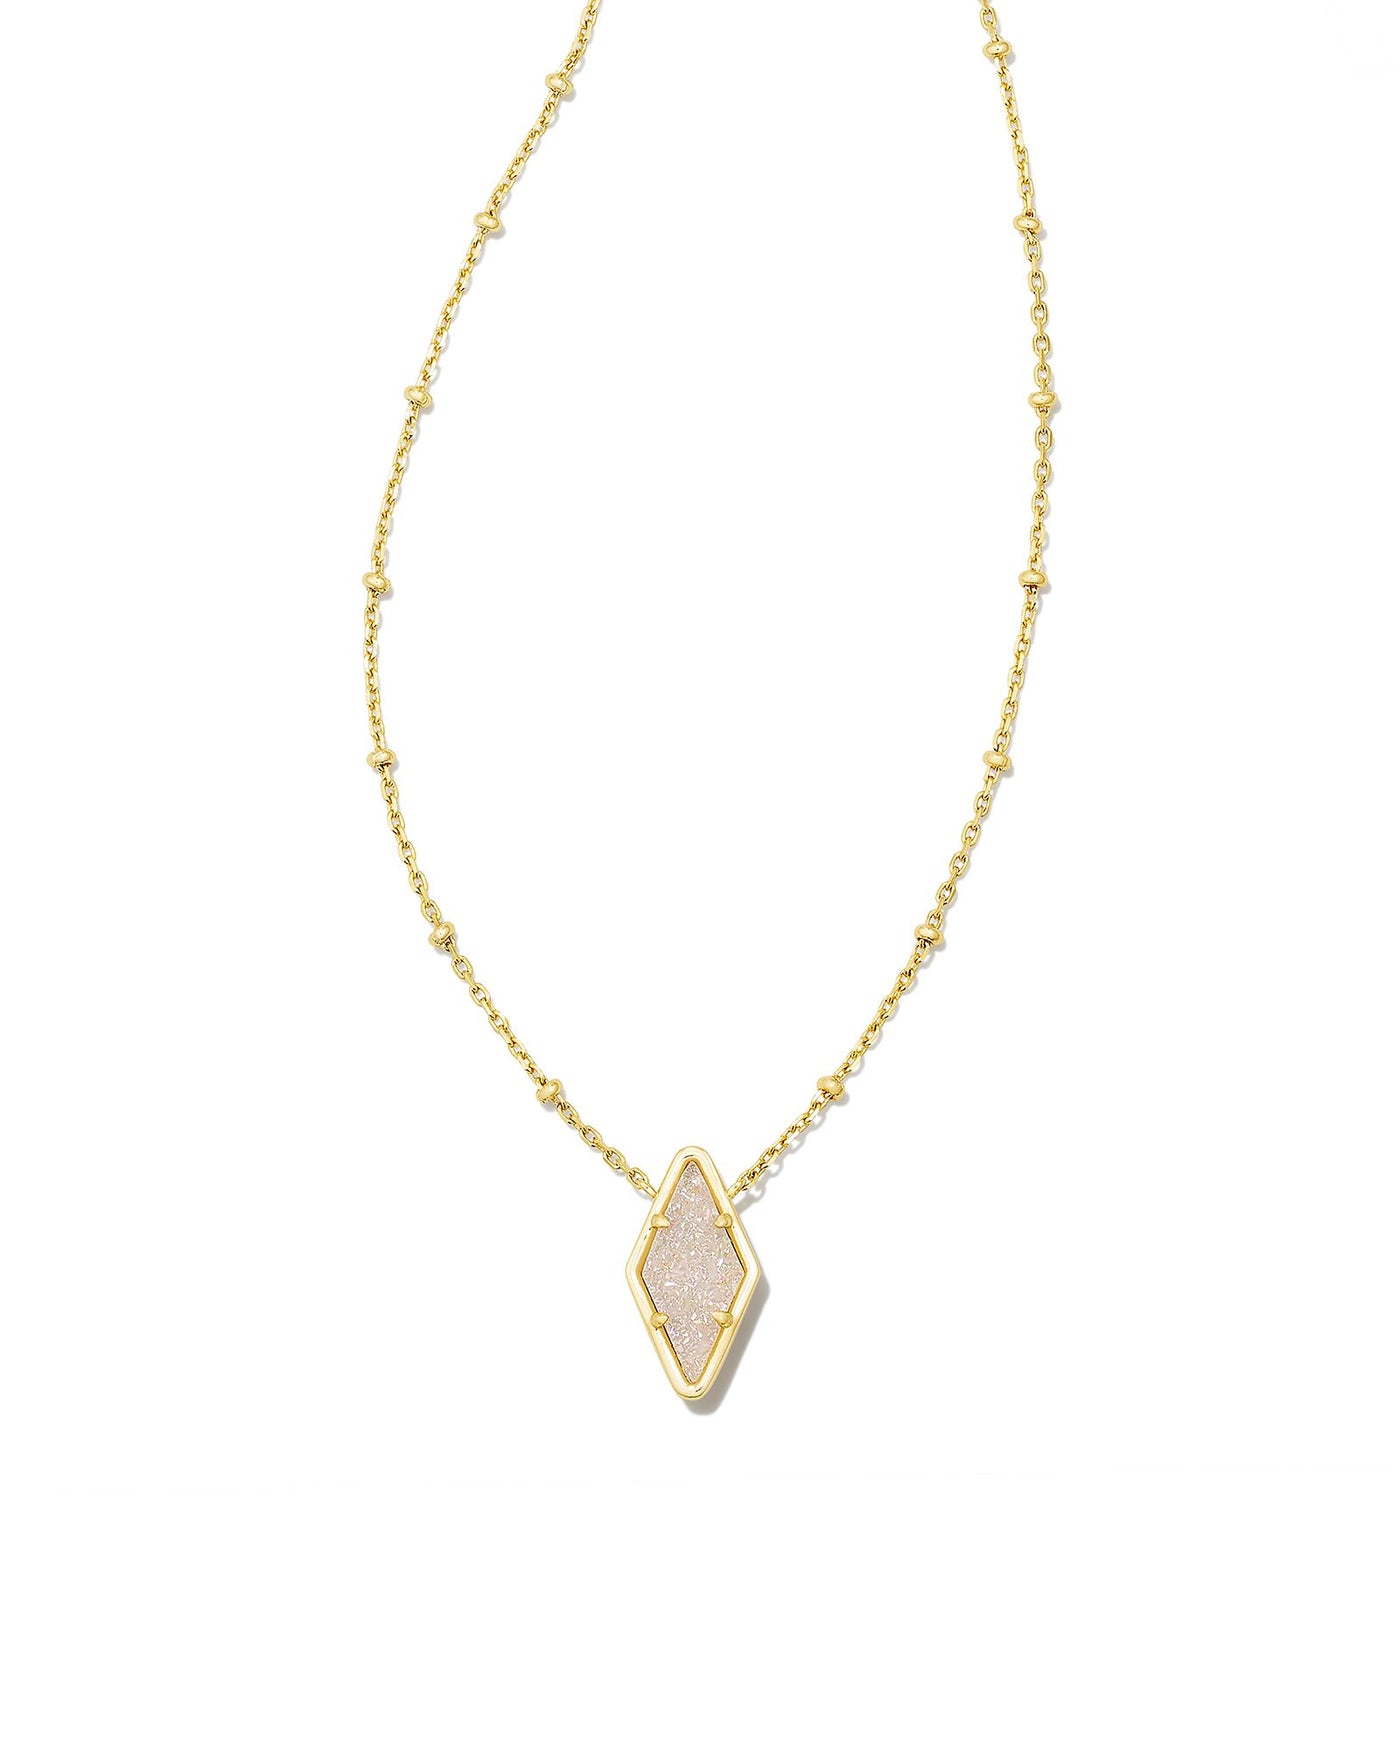 Kendra Scott Kinsley Short Pendant Necklace-Necklaces-Kendra Scott-Market Street Nest, Fashionable Clothing, Shoes and Home Décor Located in Mabank, TX